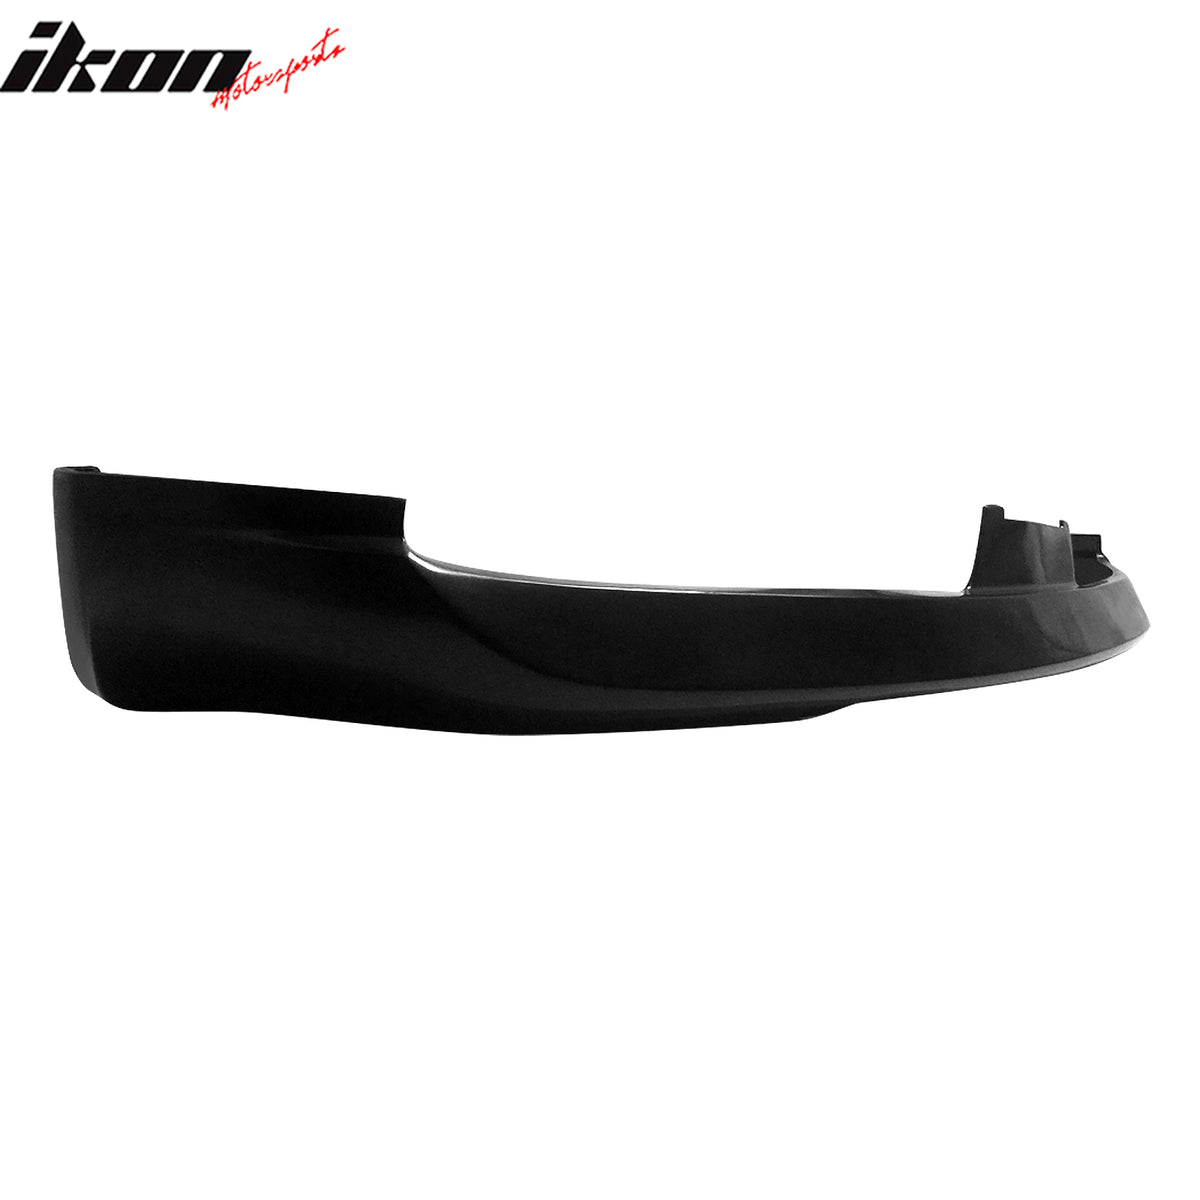 Fits 03-07 Infiniti G35 Coupe ING Style Front Lip Bumper Lower Spoiler - PU